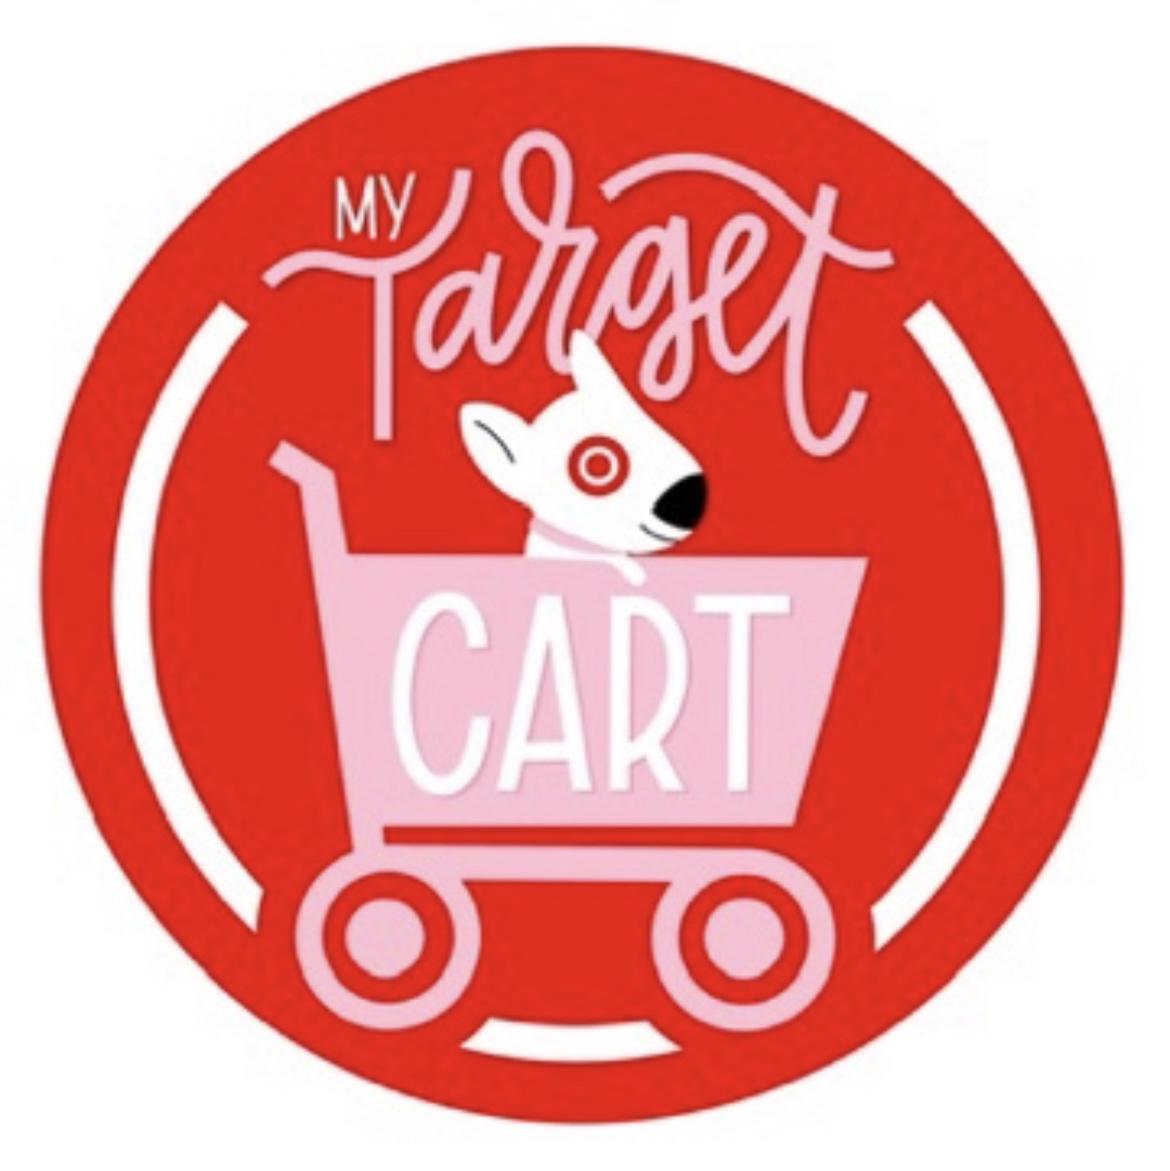 My Target Cart's images